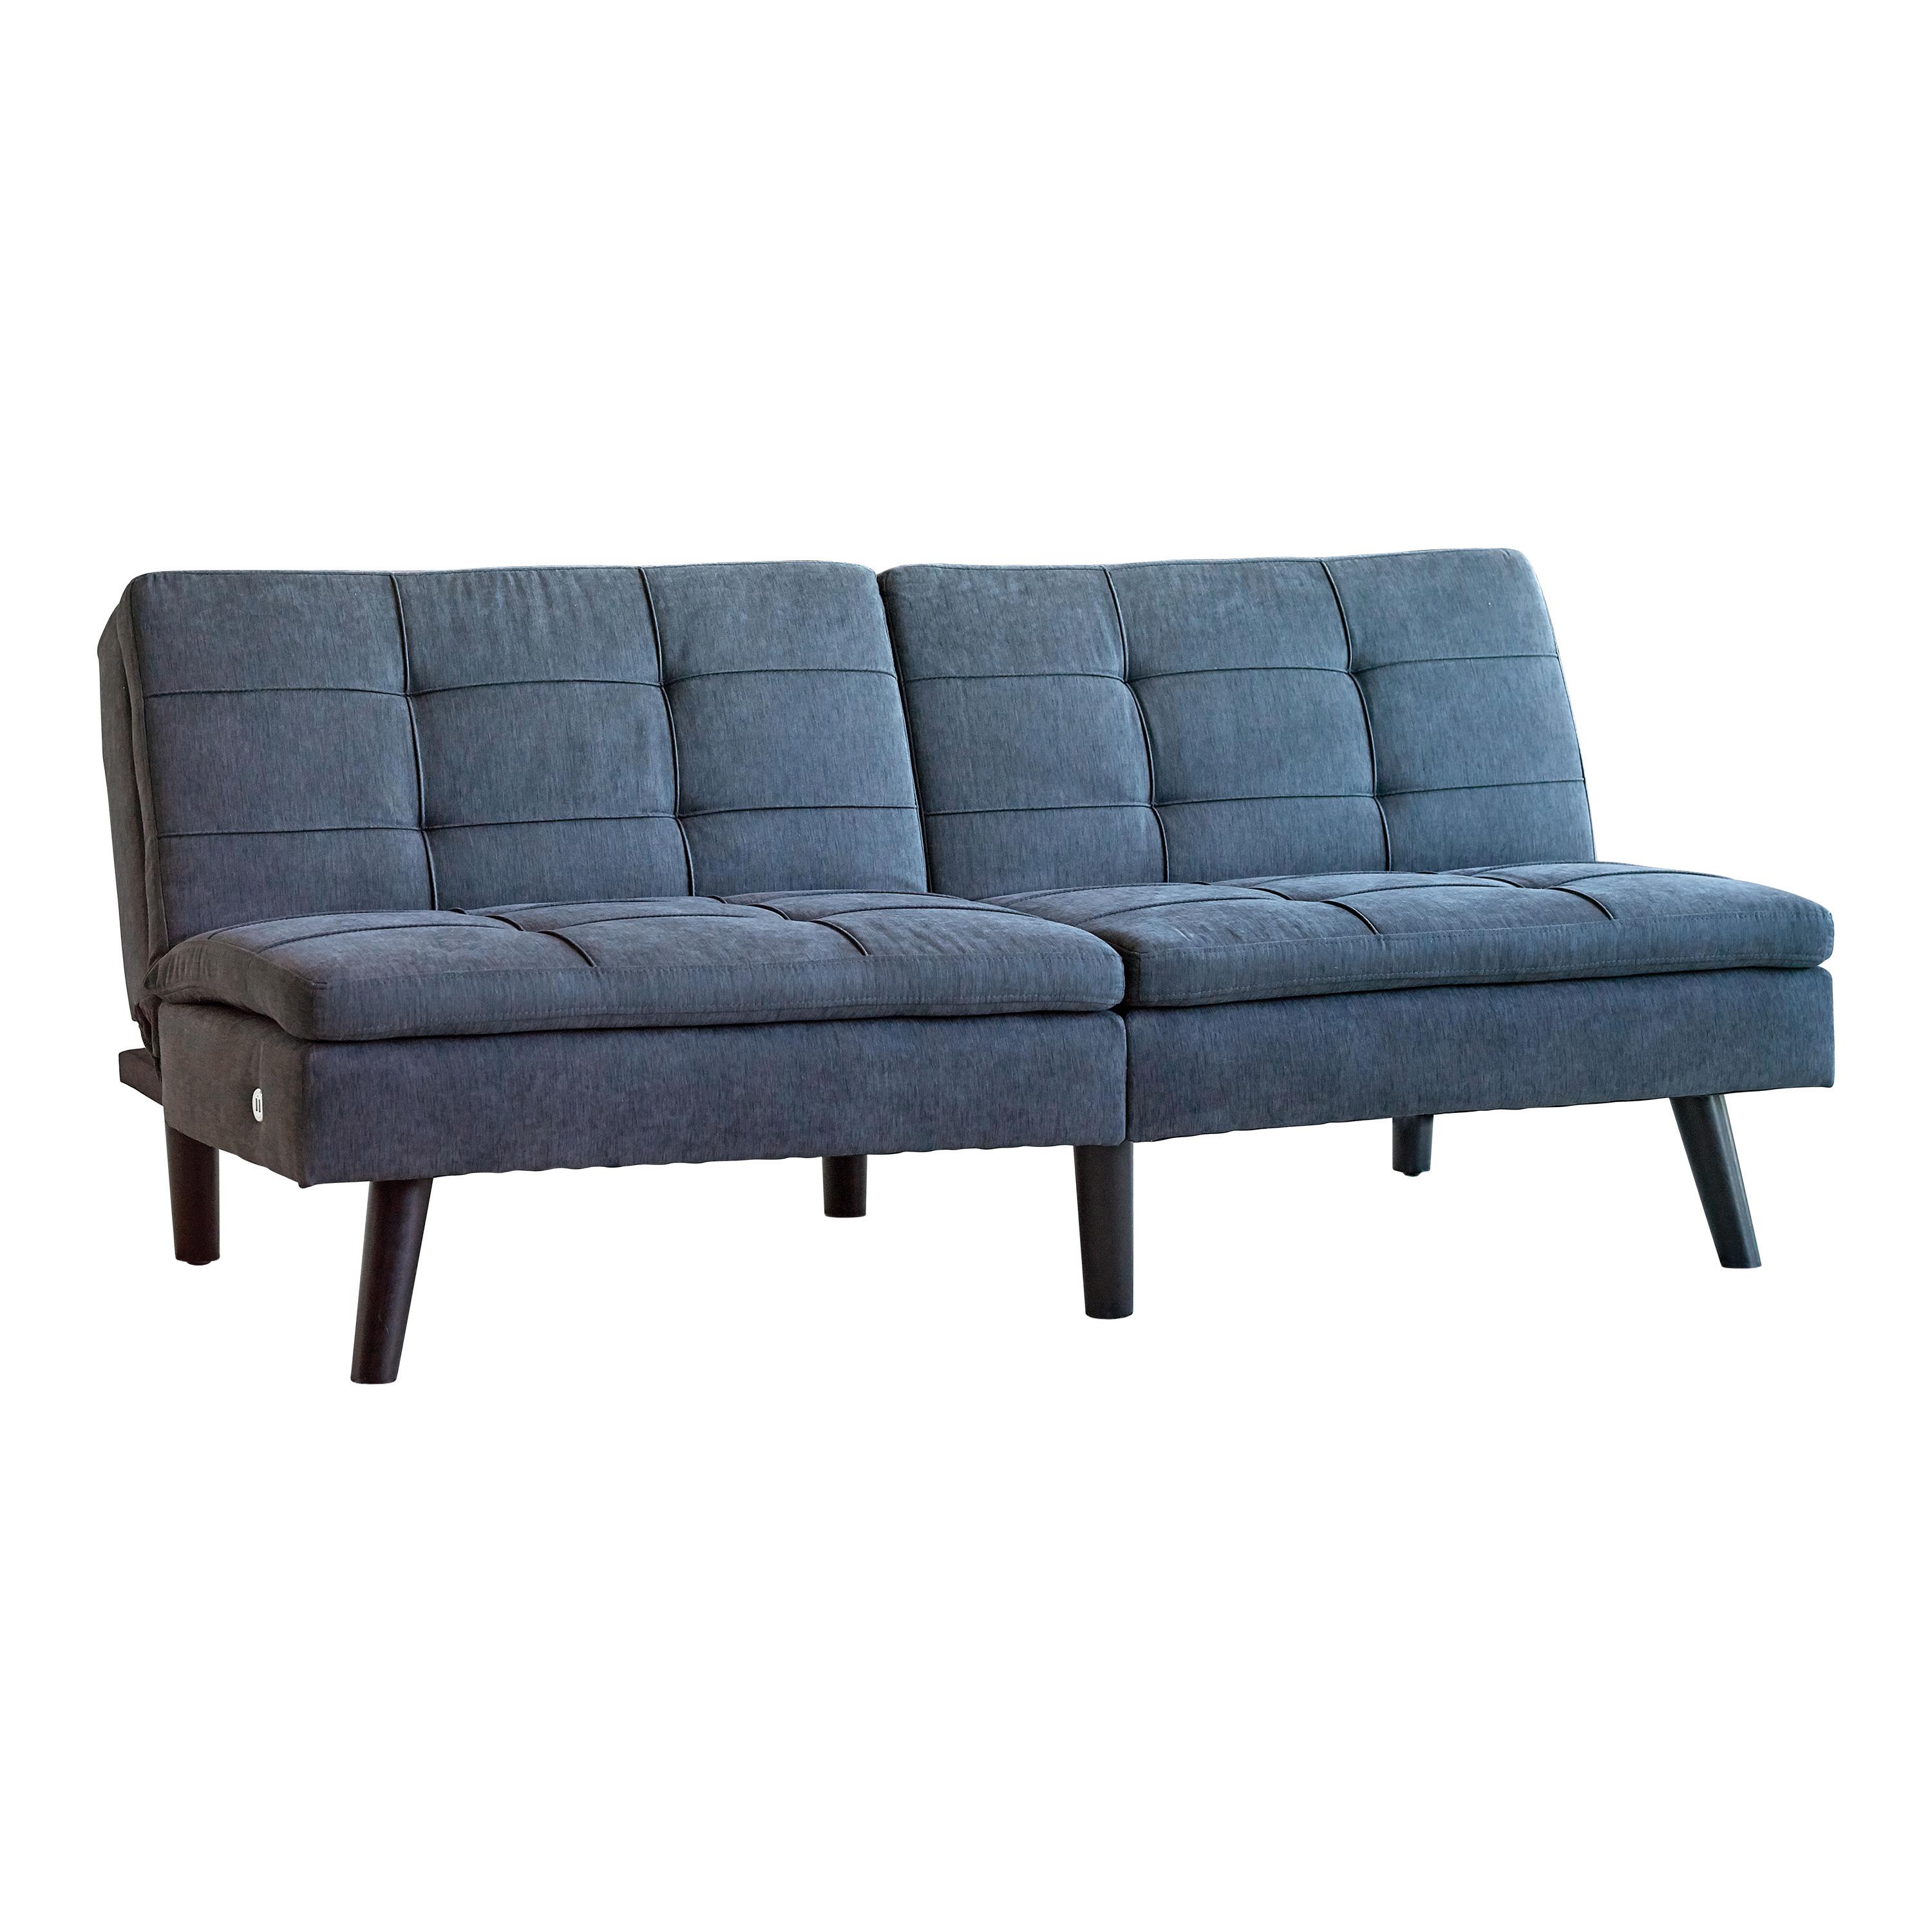 Transitional Sofa bed 360207 Greeley 360207 in Gray Fabric